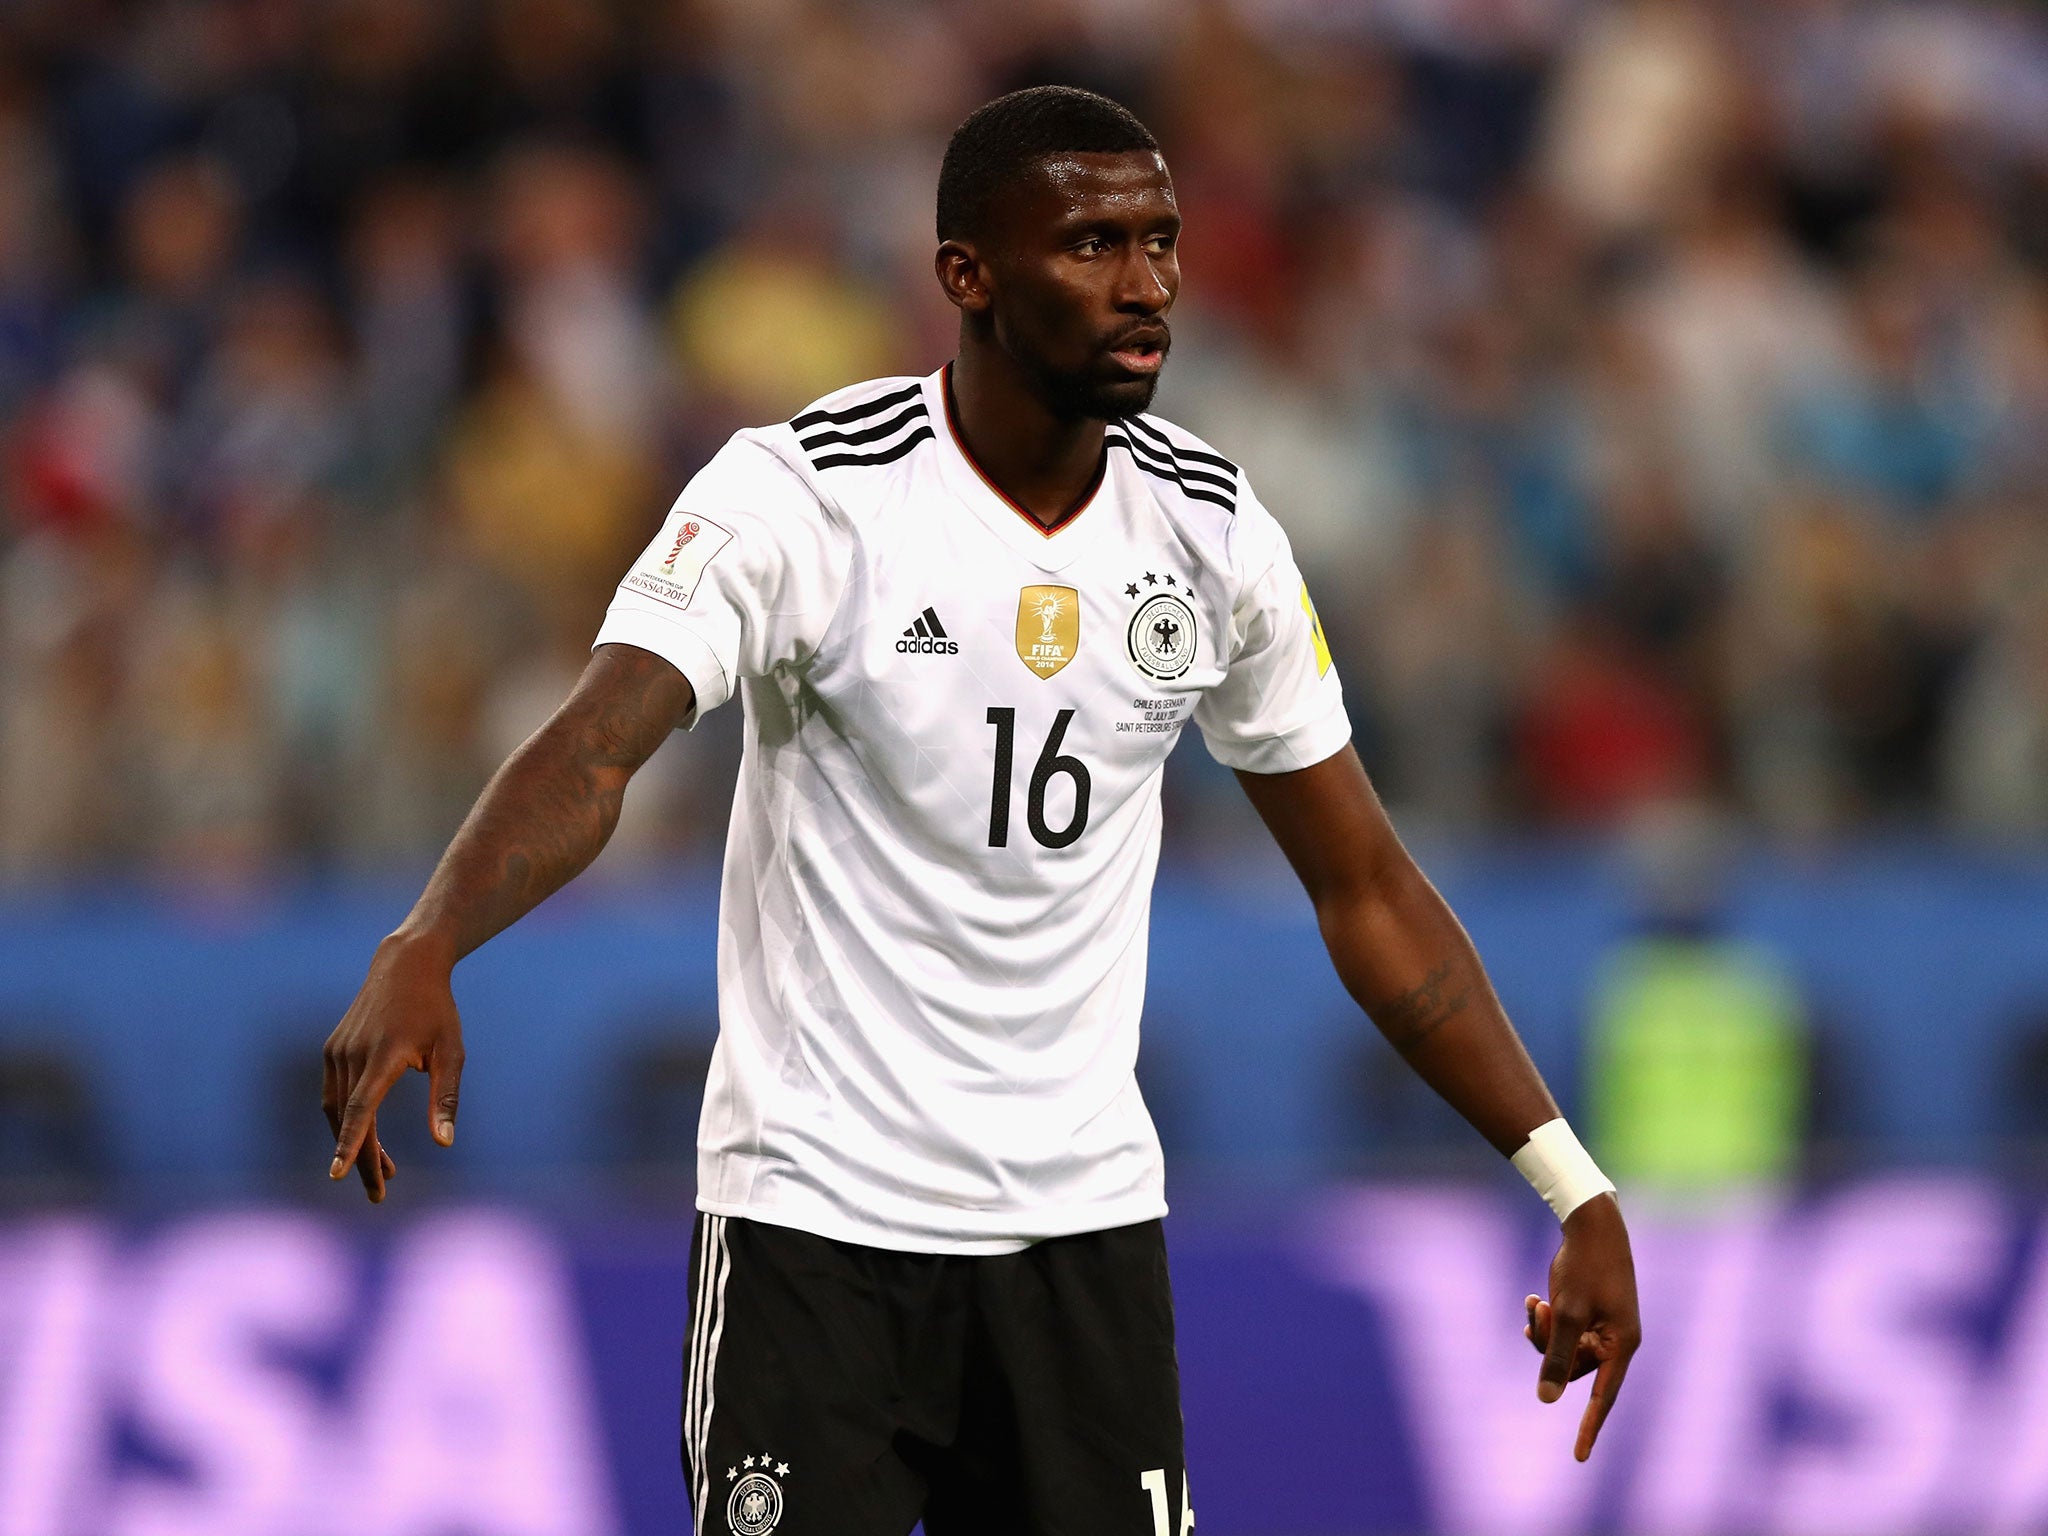 Antonio Rudiger has been linked with a move to Chelsea